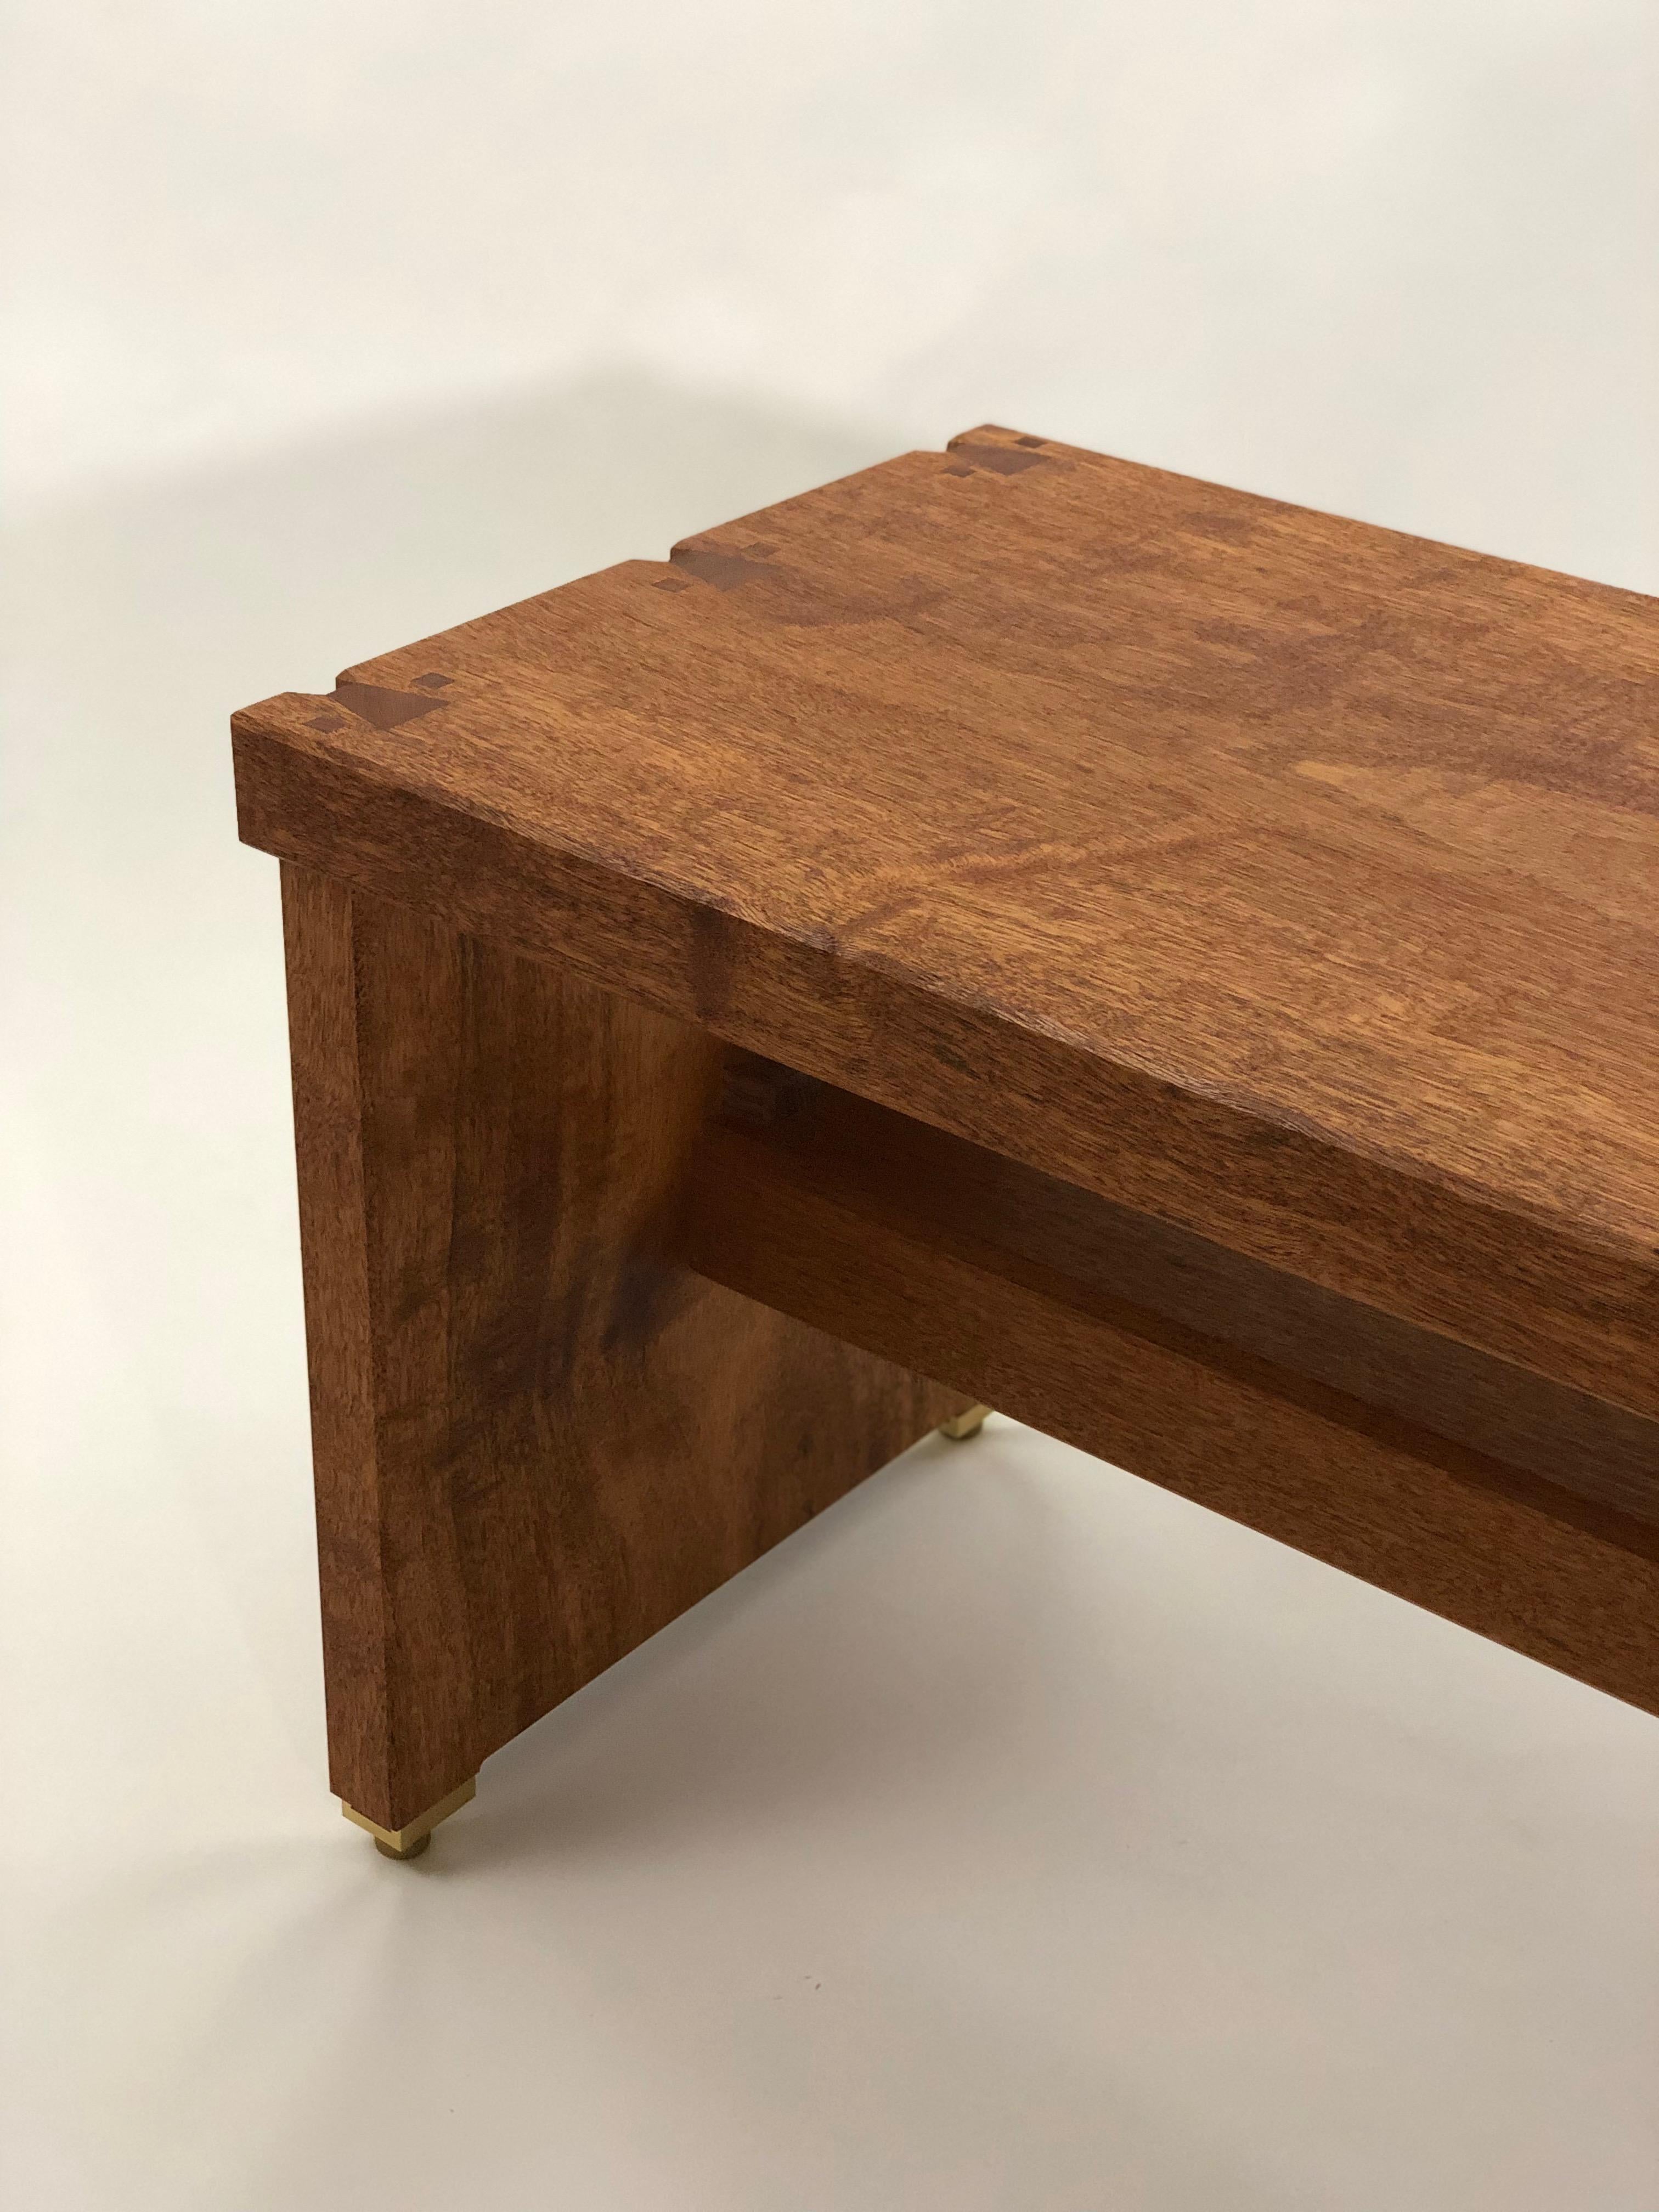 In designing this bench I took cues from sashimono, seeking a outwardly simple aesthetic which gives way to more elaborate detail upon a closer look. In building this bench I utilized joinery unique to Japanese timber carpentry. 

